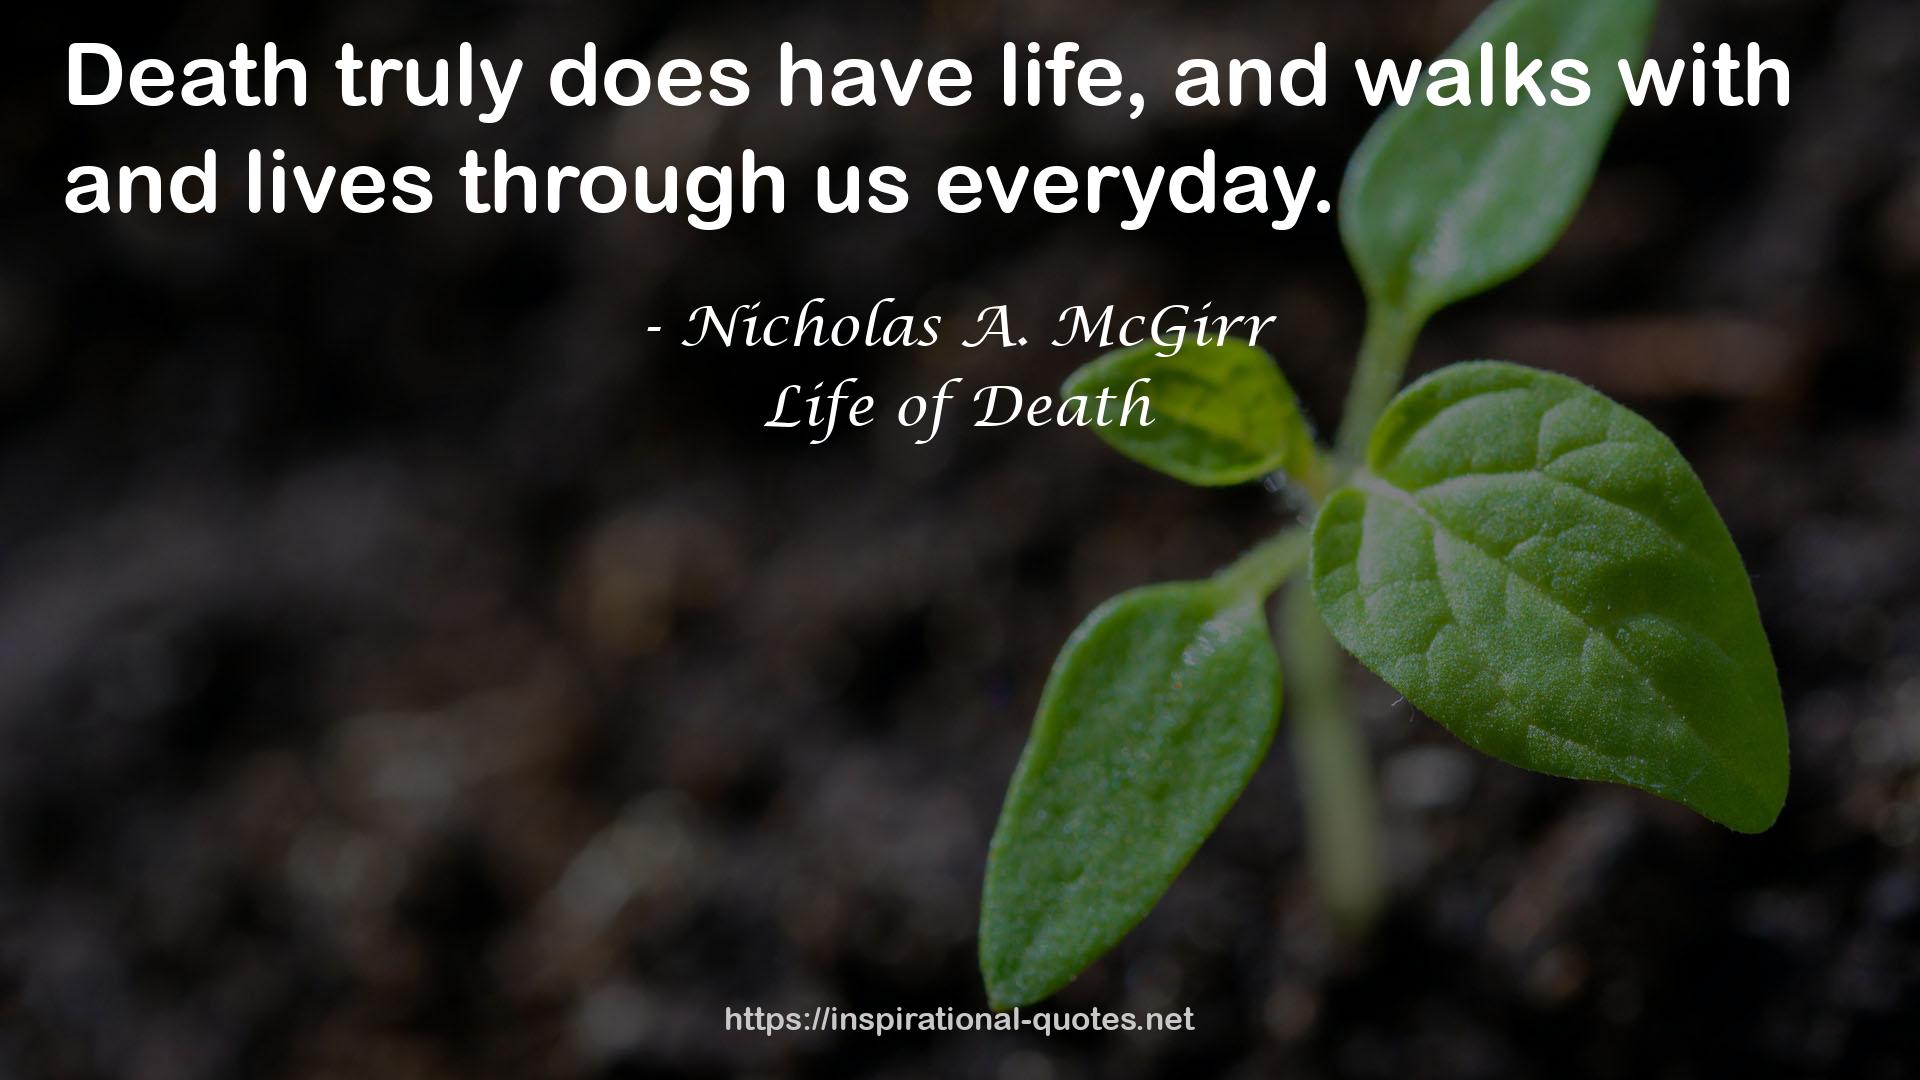 Life of Death QUOTES